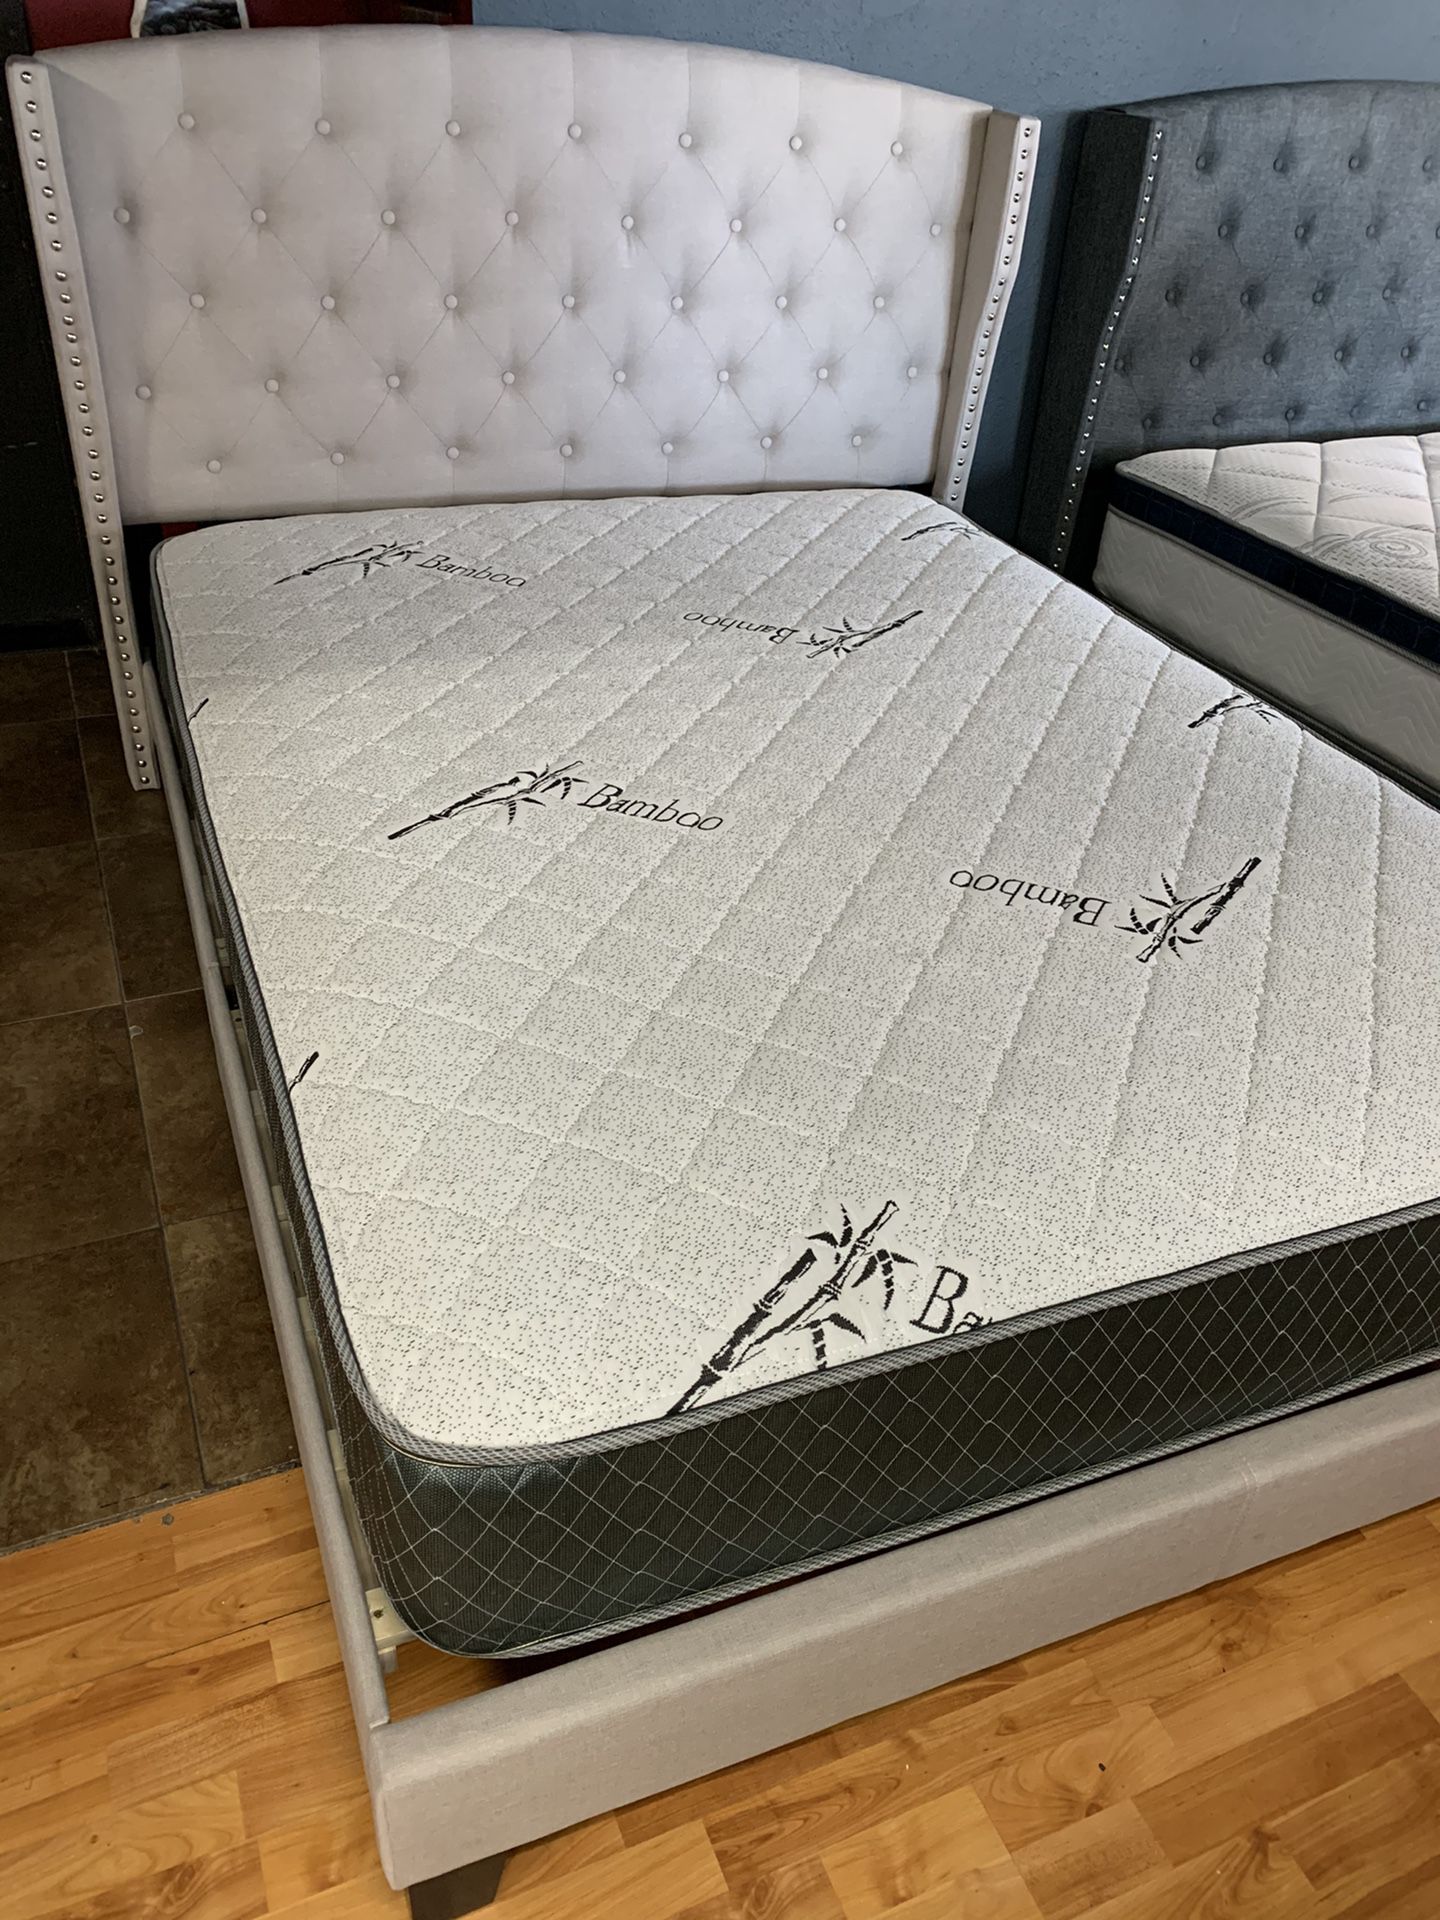 ⬛️ BLACK FRIDAY SALE ⬛️. QUEEN BED FRAME ONLY $199 OR $349 WITH BAMBOO PILLOW TOP MATTRESS‼️